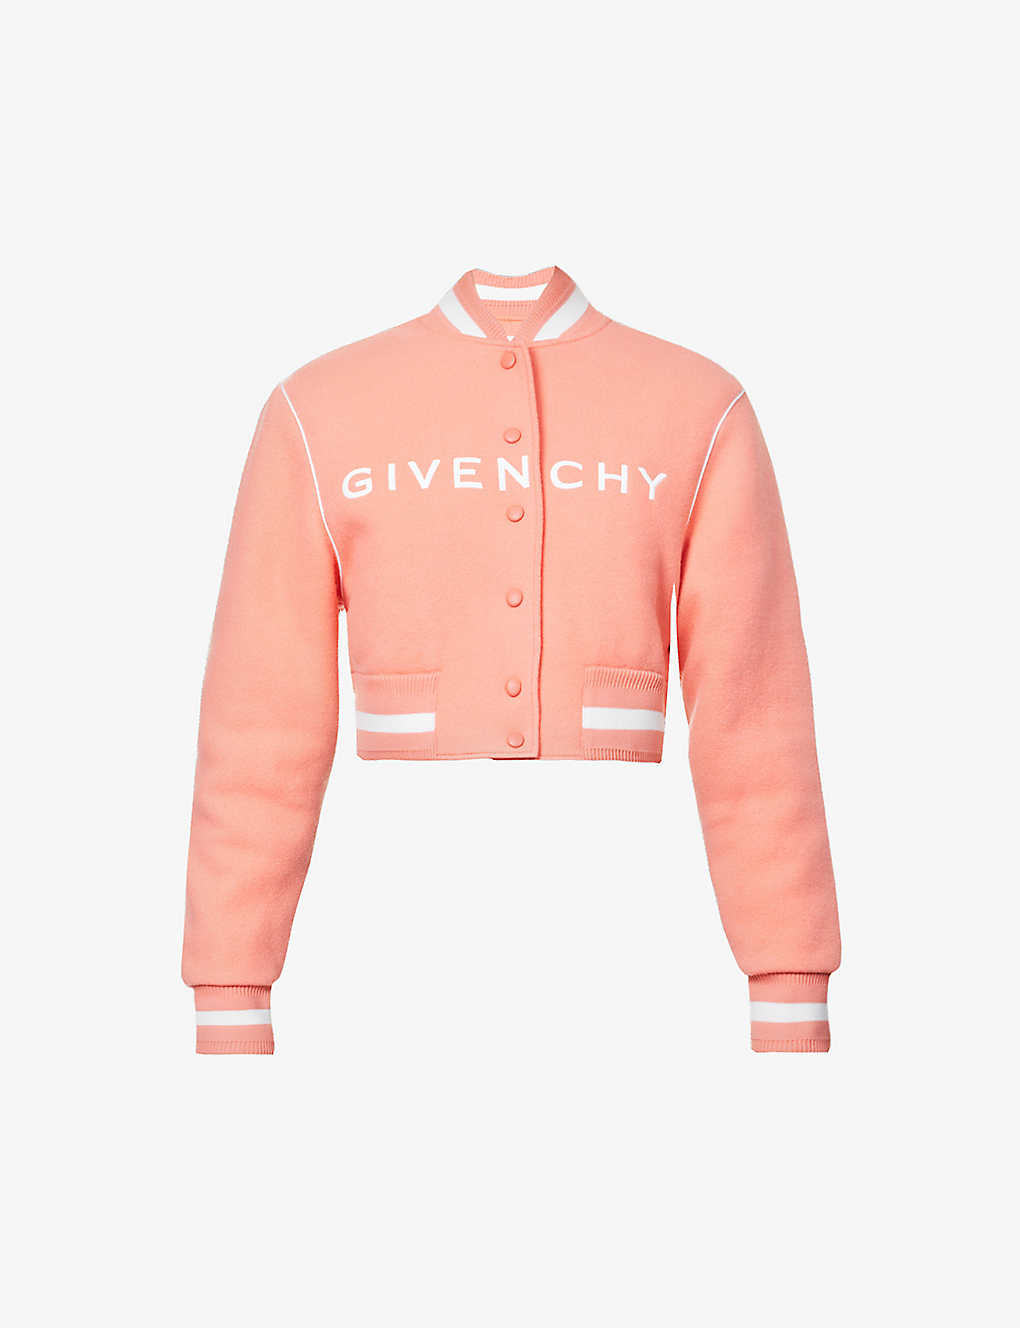 GIVENCHY GIVENCHY WOMEN'S CORAL LOGO-PRINT CROPPED WOOL JACKET,63362580